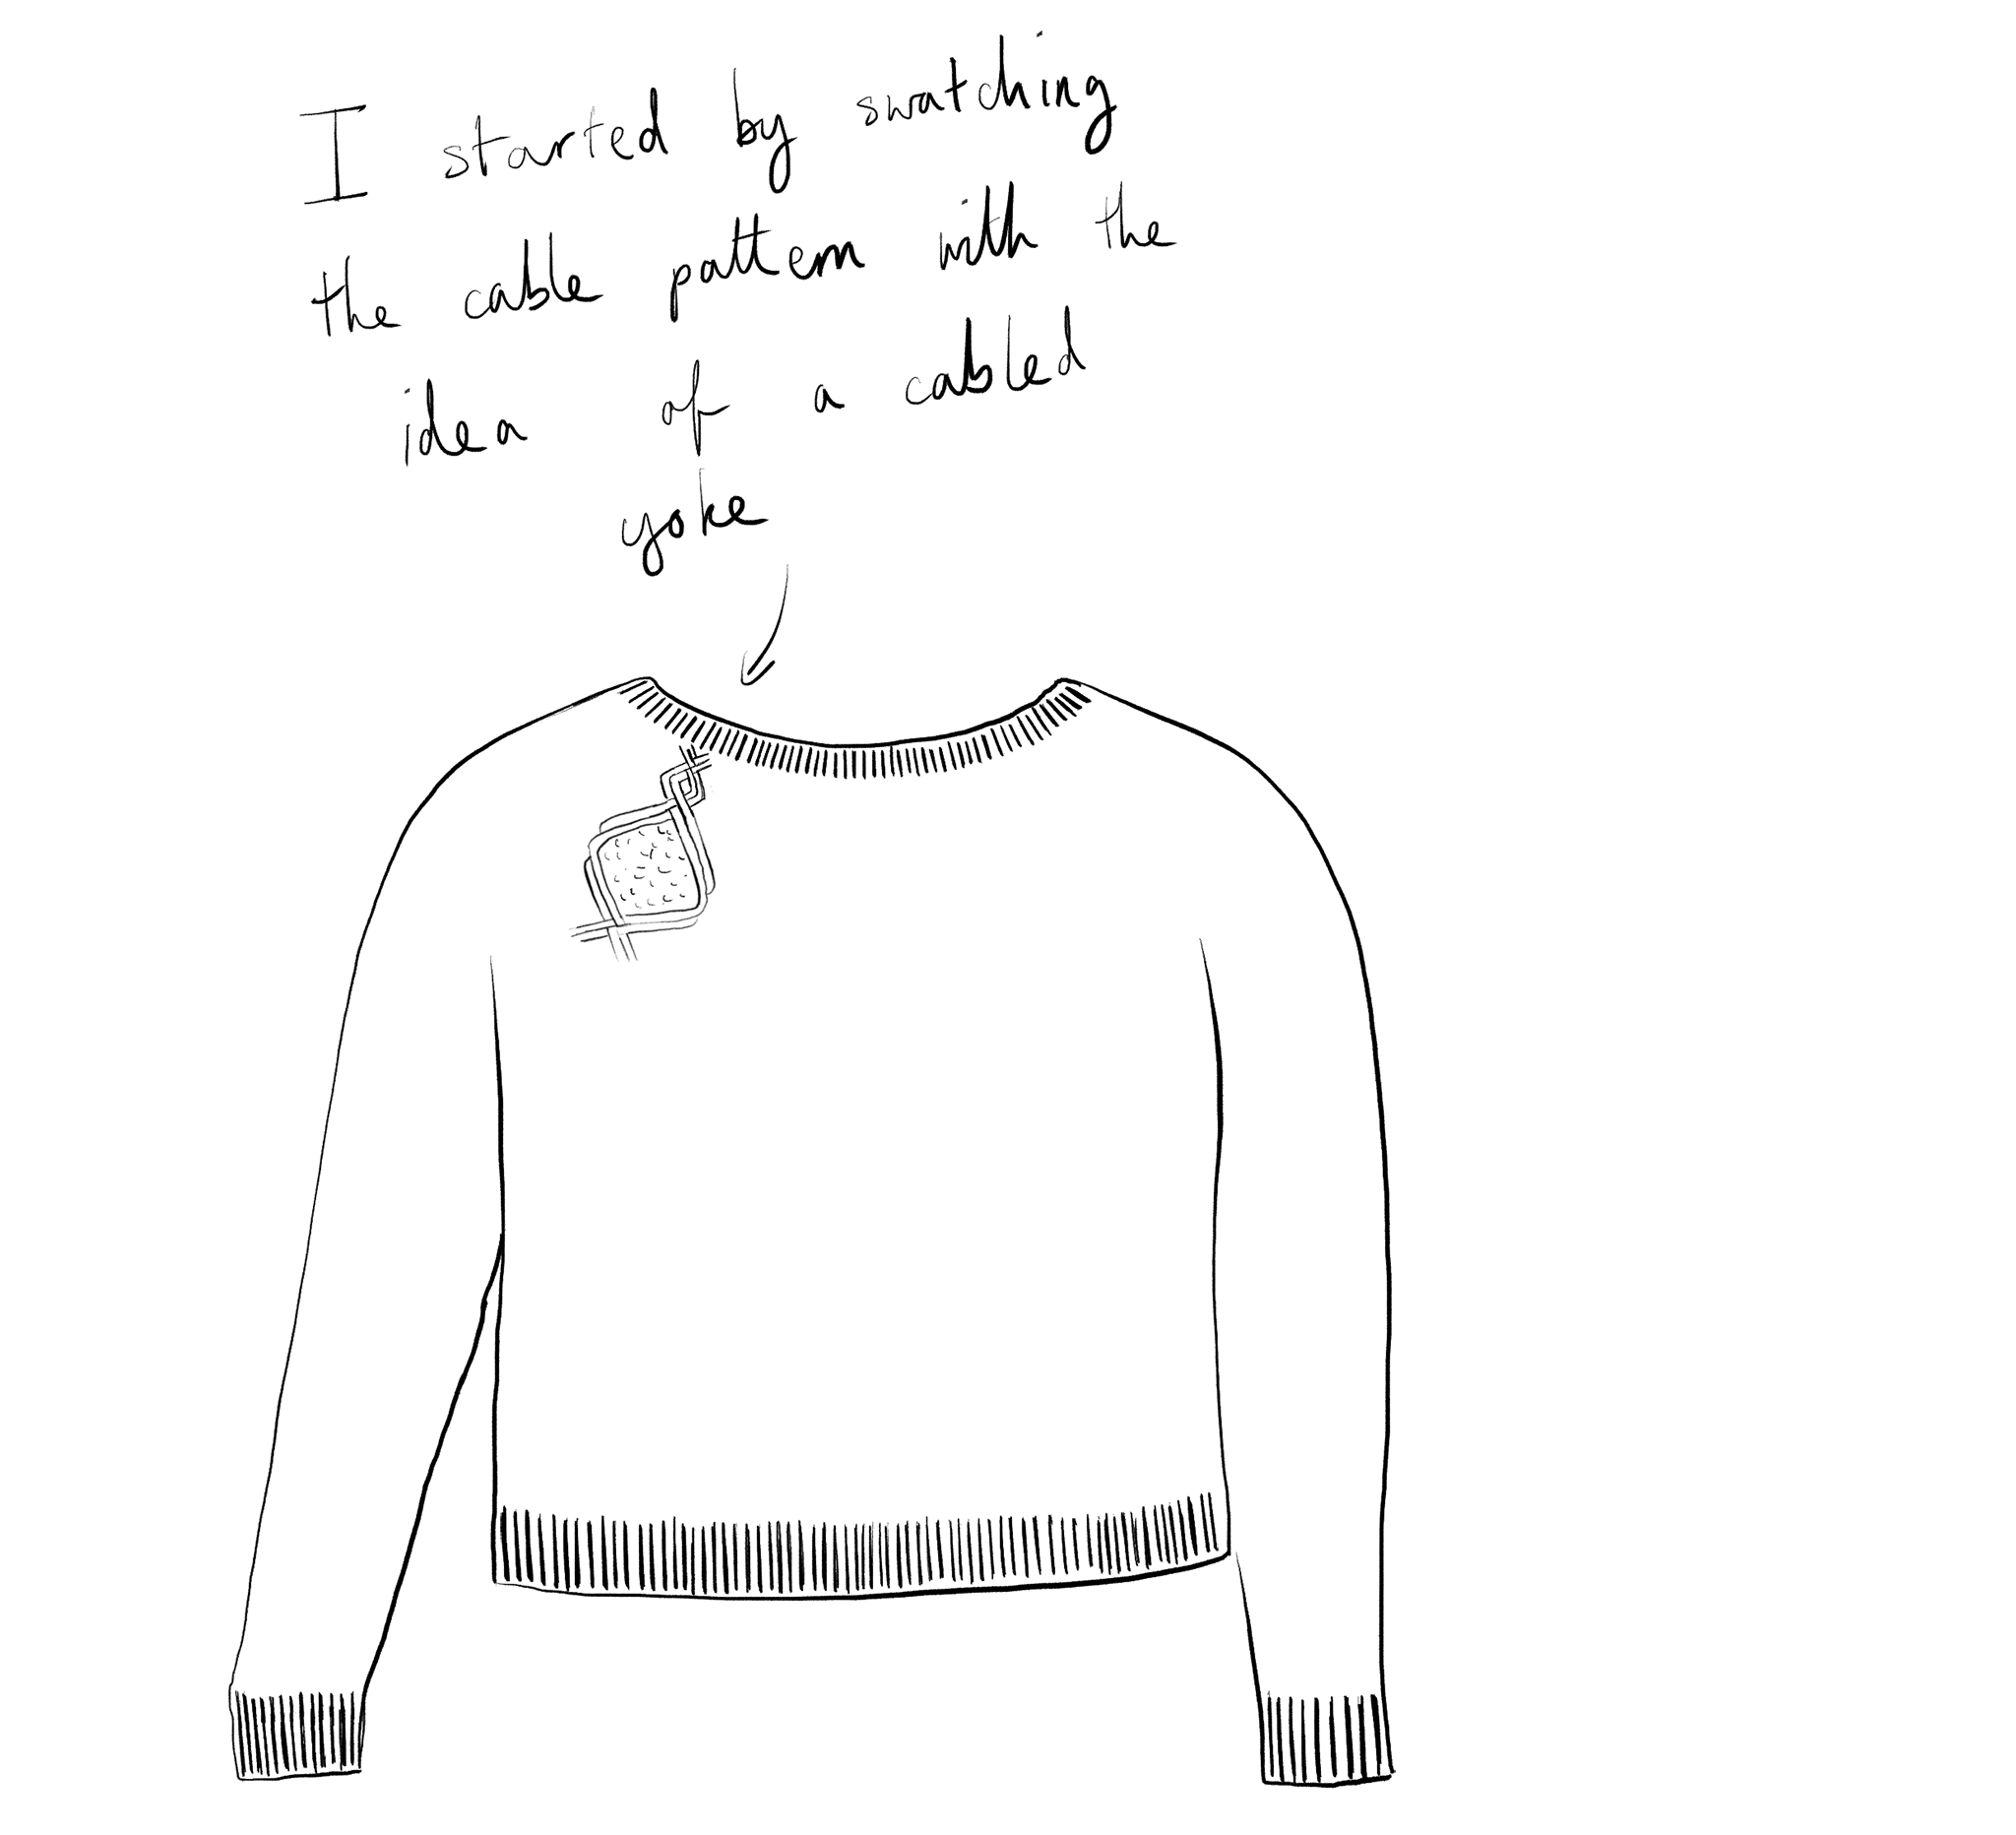 a sketch of a sweater body with cable design on the yoke and the text 'I started by swatching the cable pattern with the idea of a cabled yoke.'